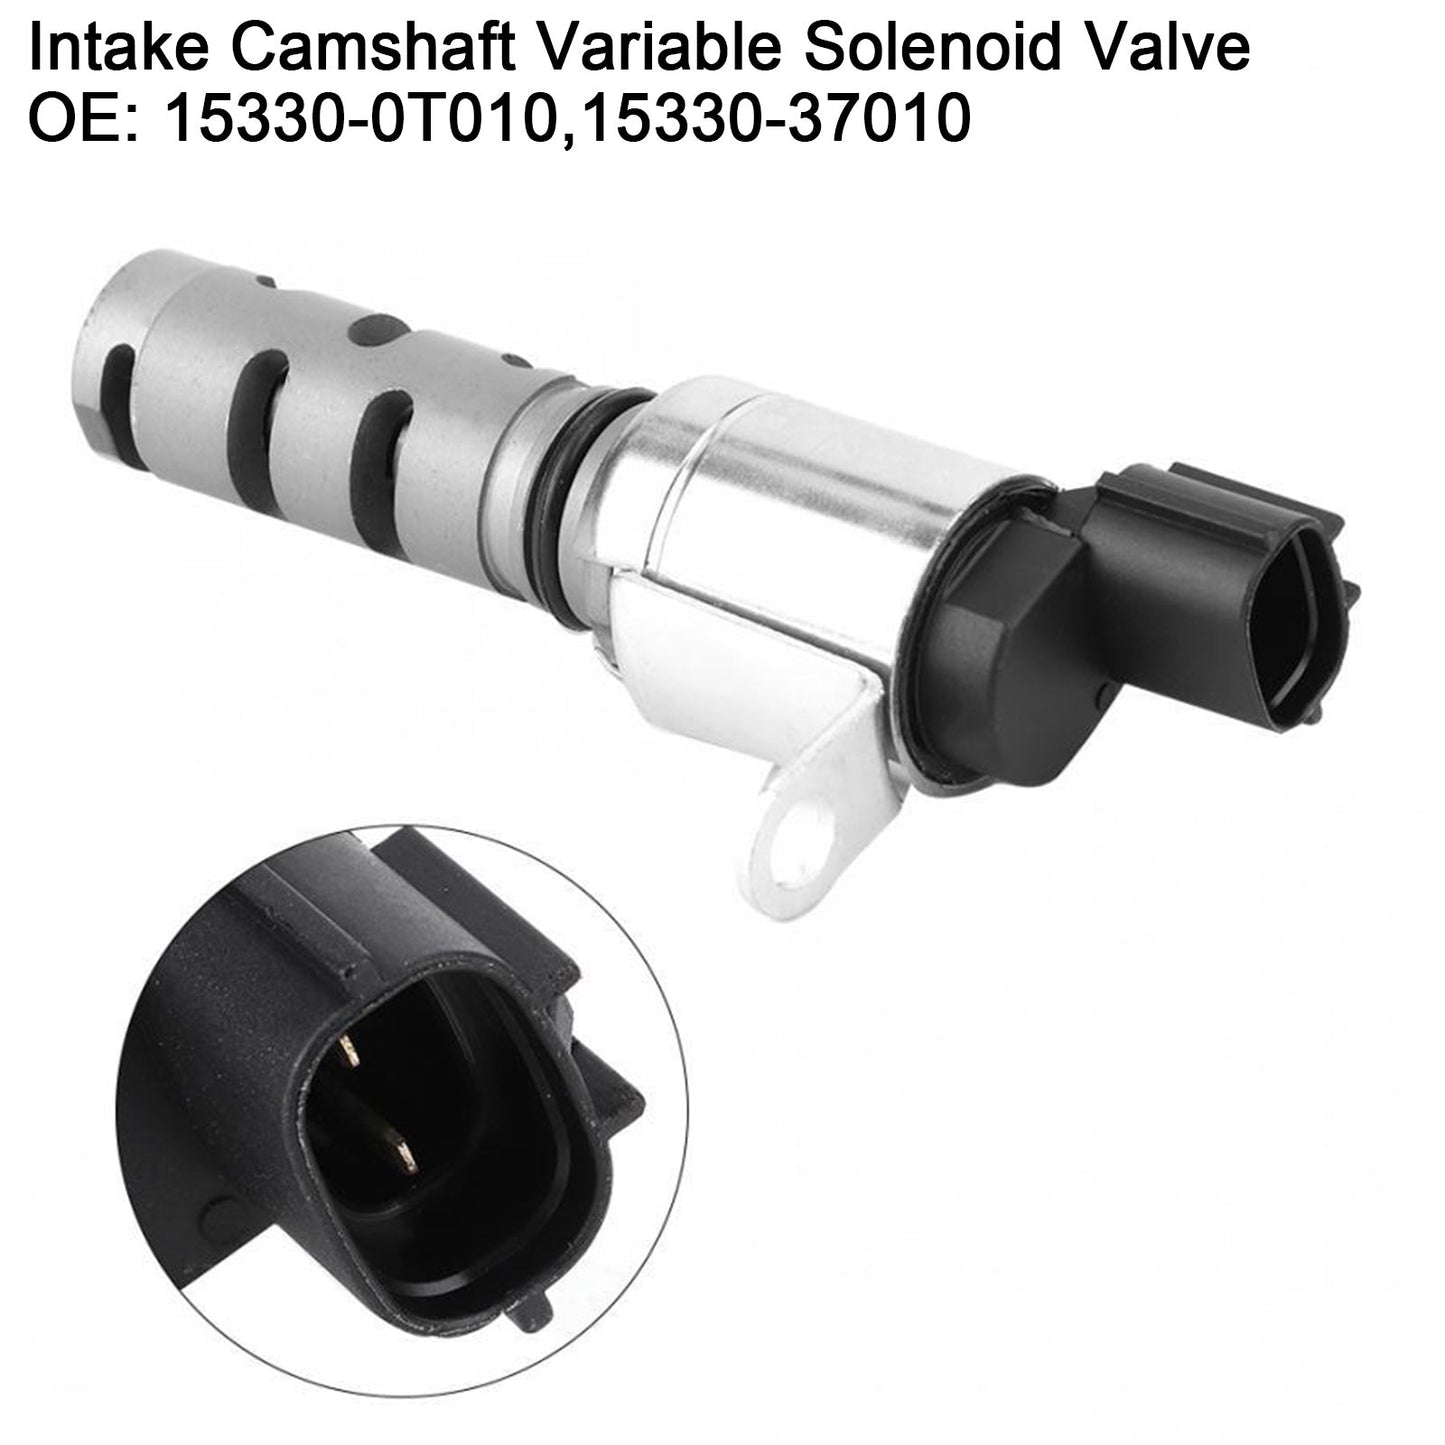 Intake Camshaft Variable Solenoid Valve 15330-0T010 For Toyota Camry Corolla